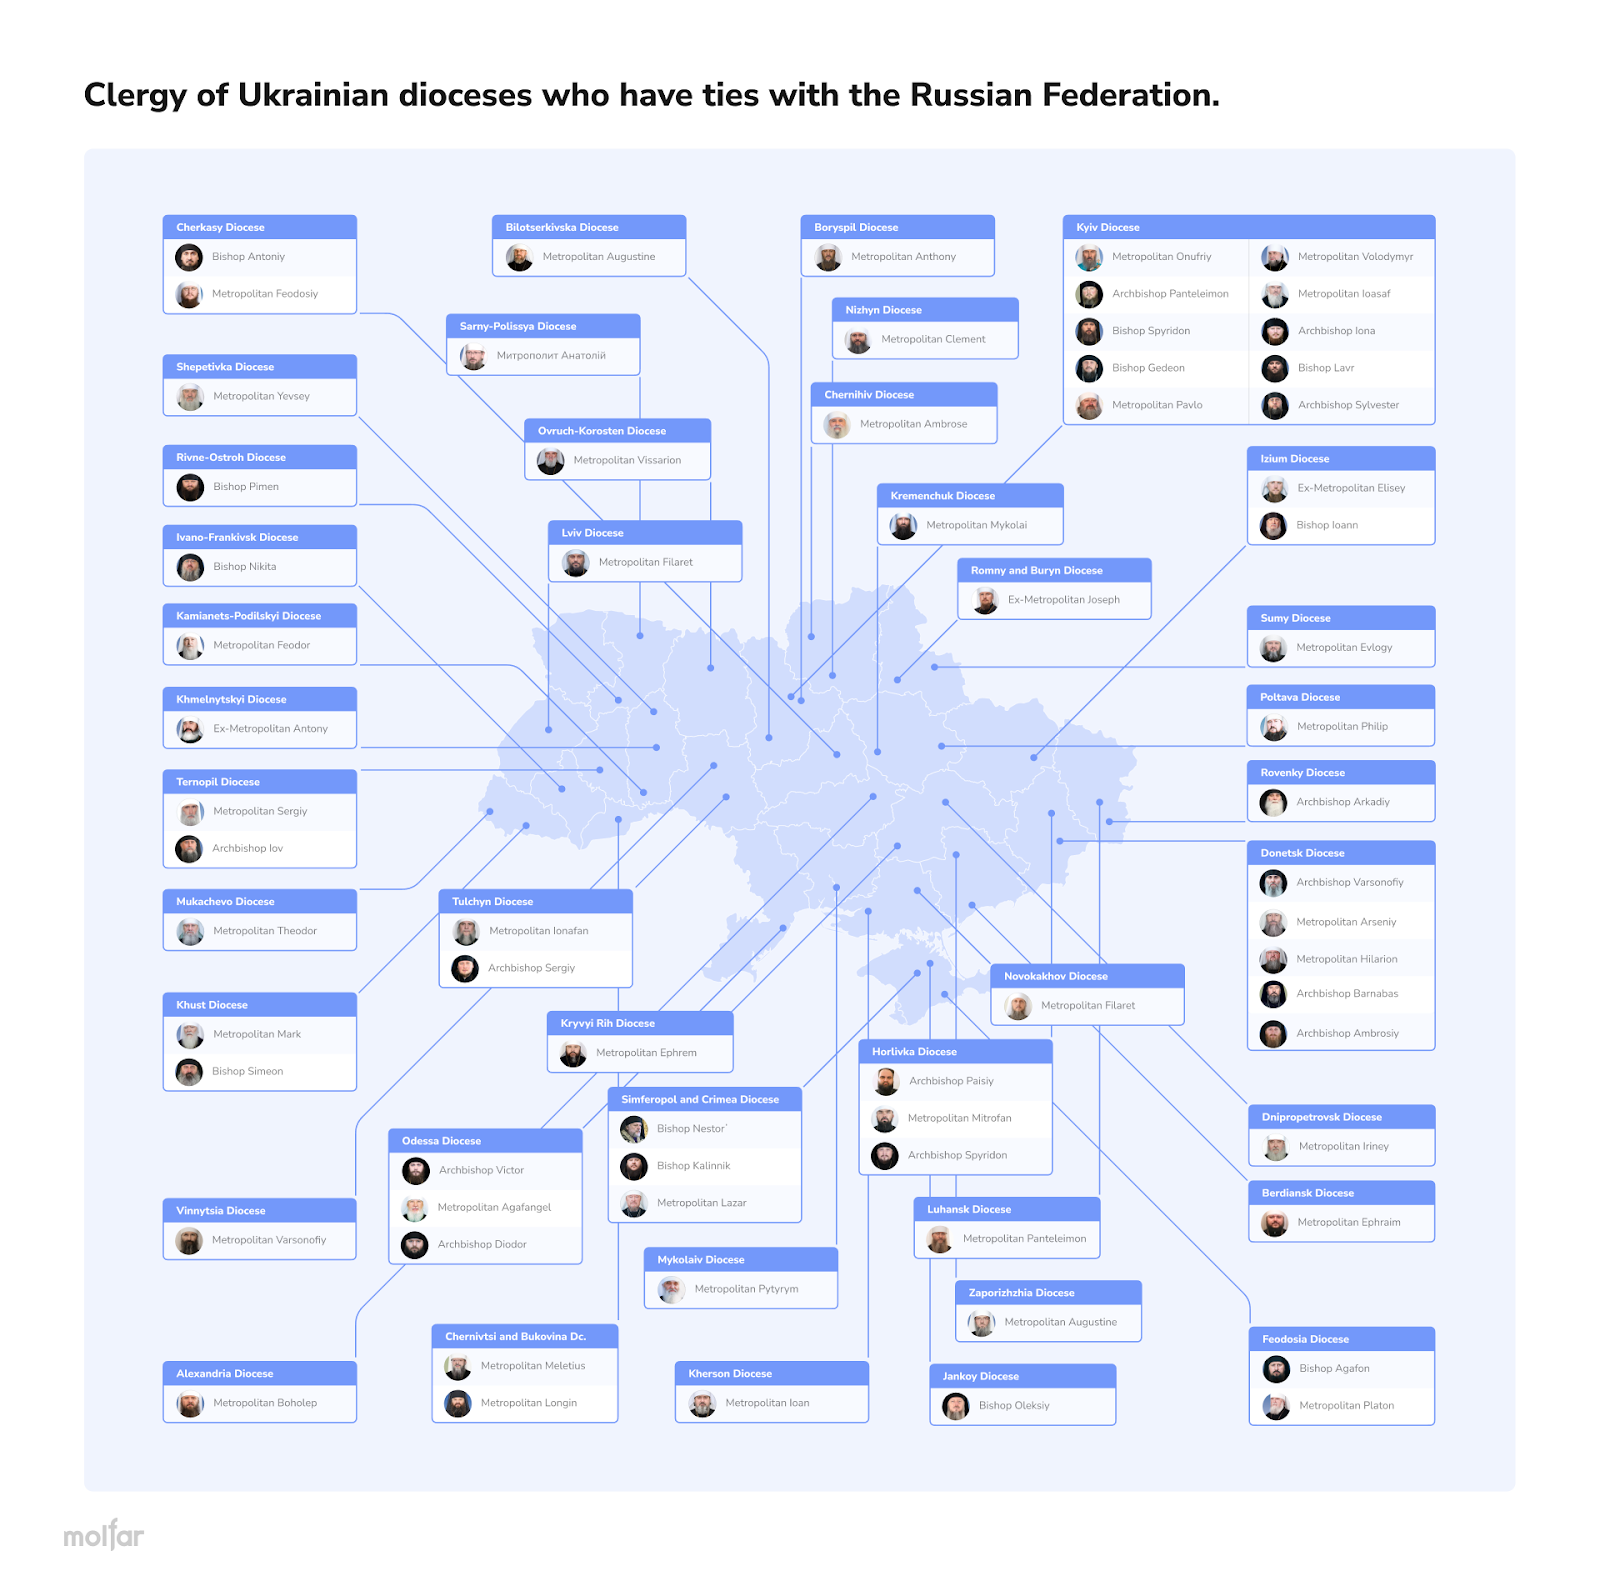 The list of all UOC MP clergy members with ties to Russia infographic